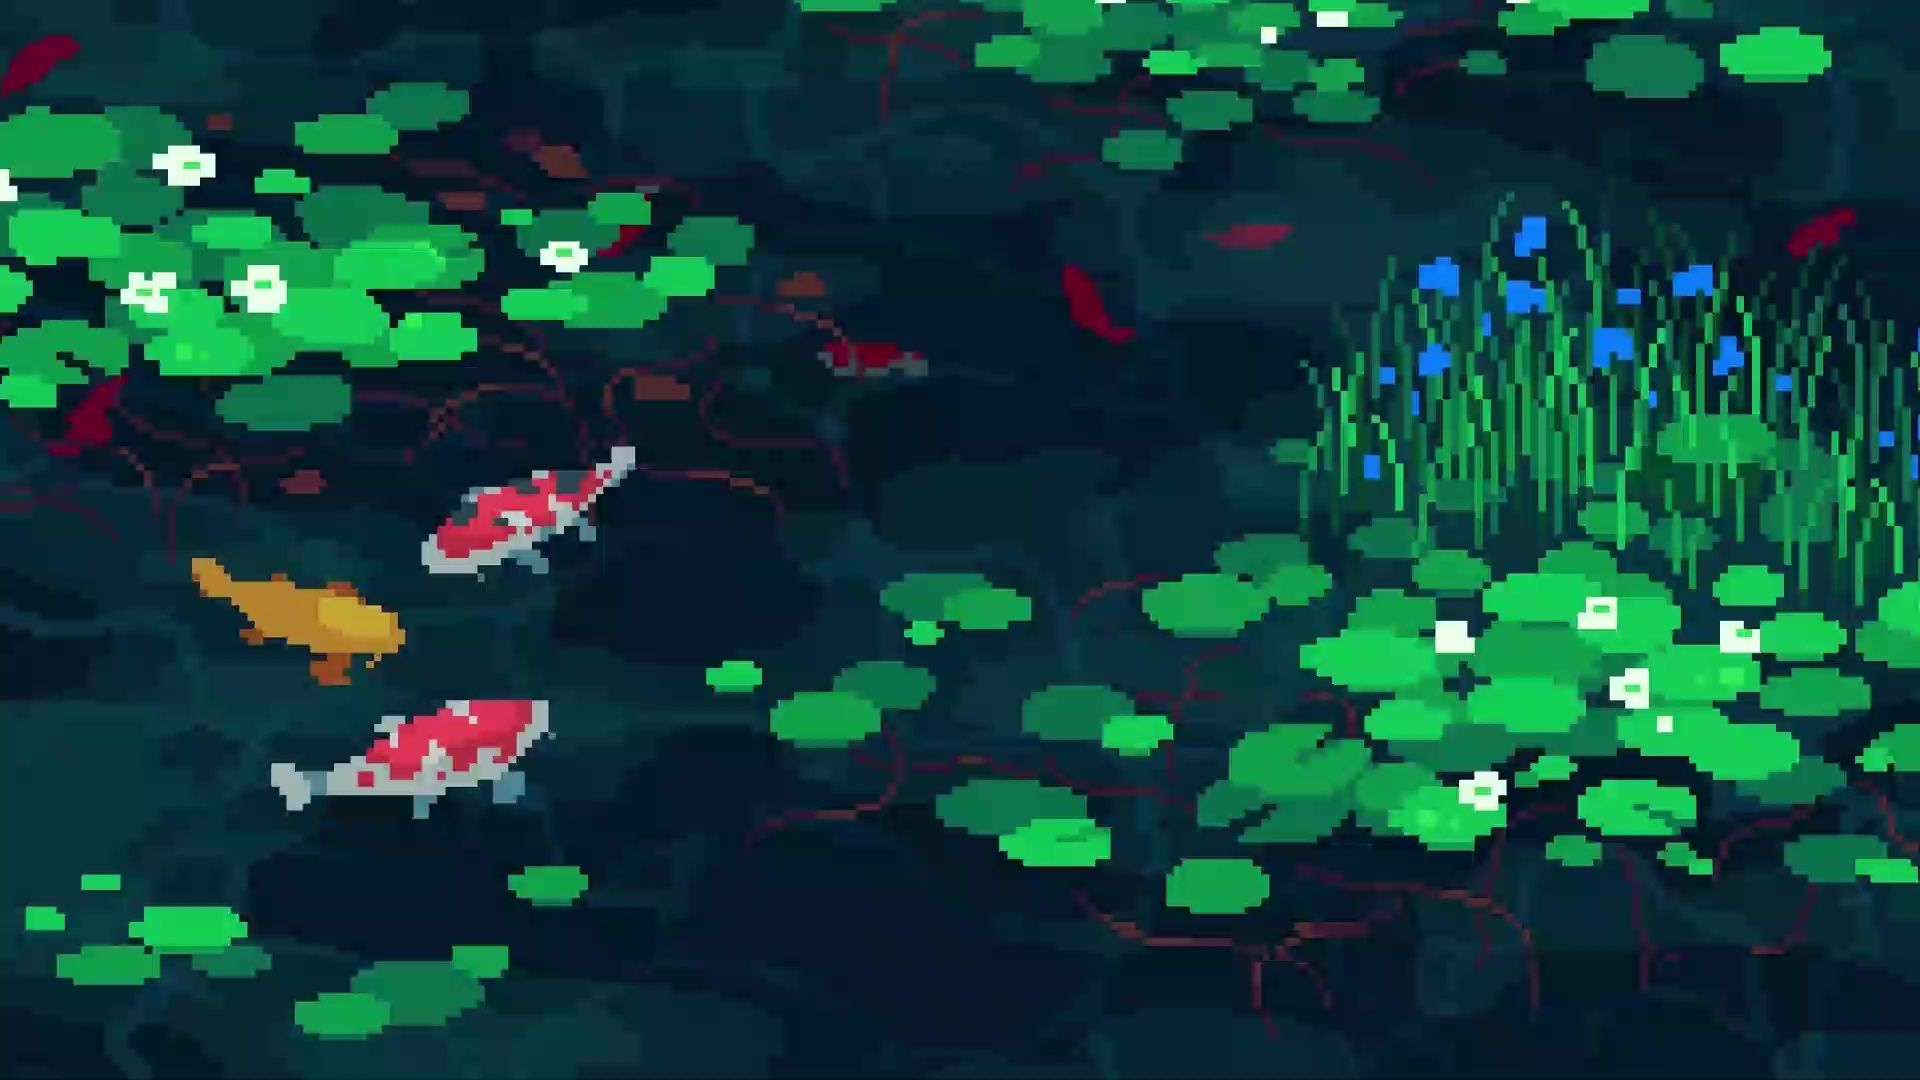 A pixel art image of a pond with koi fish and lily pads - Koi fish